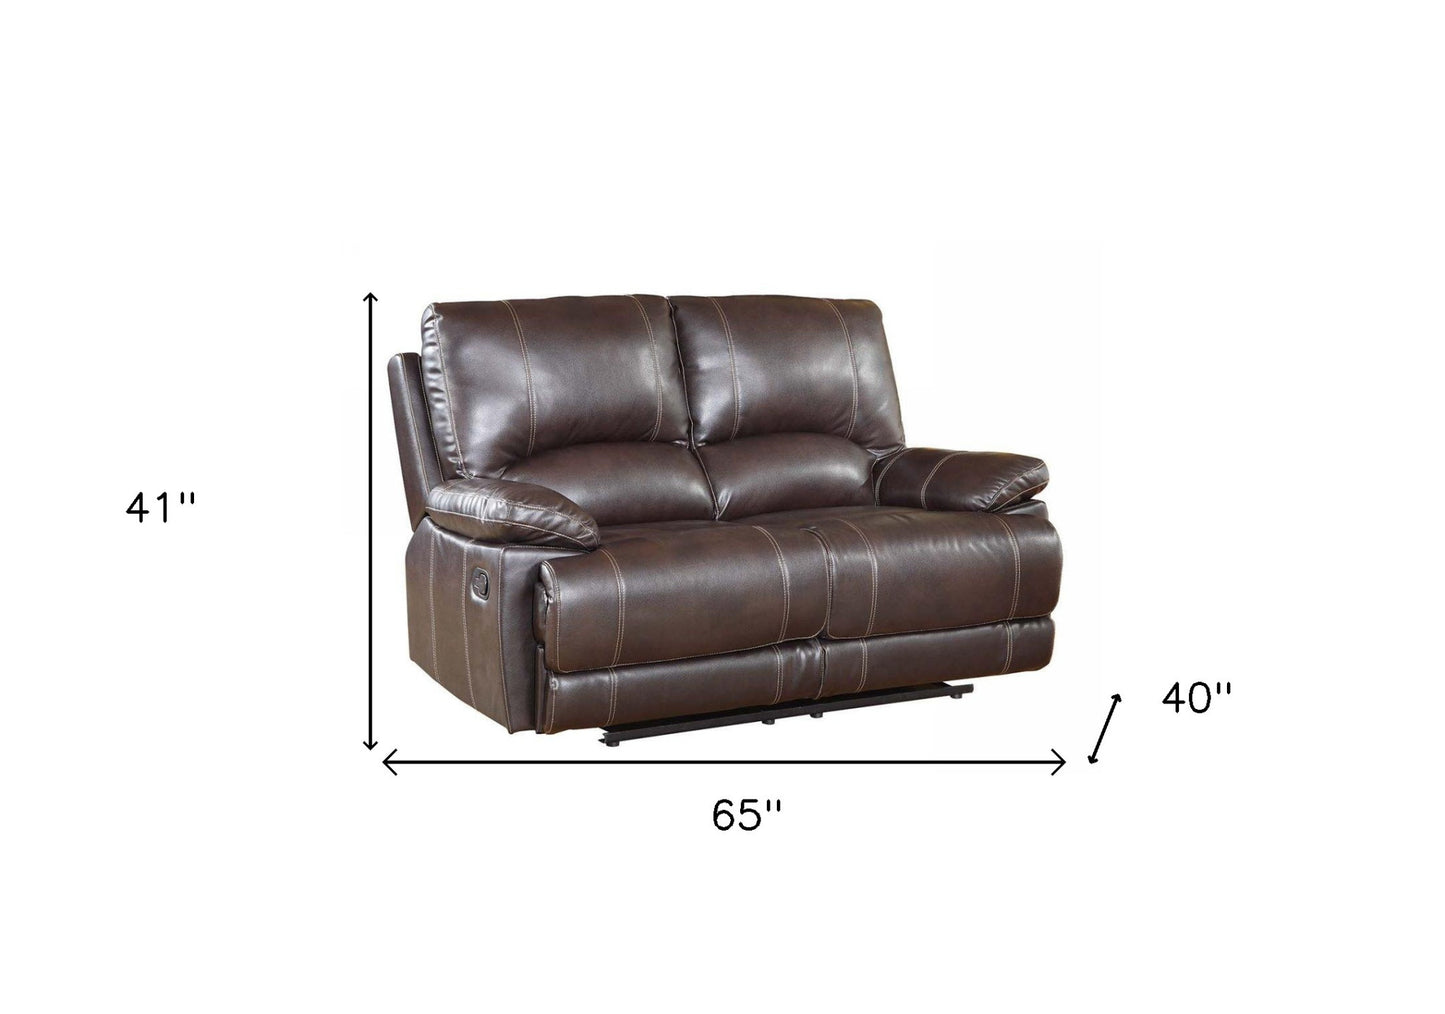 41" Stylish Brown Leather Loveseat By Homeroots